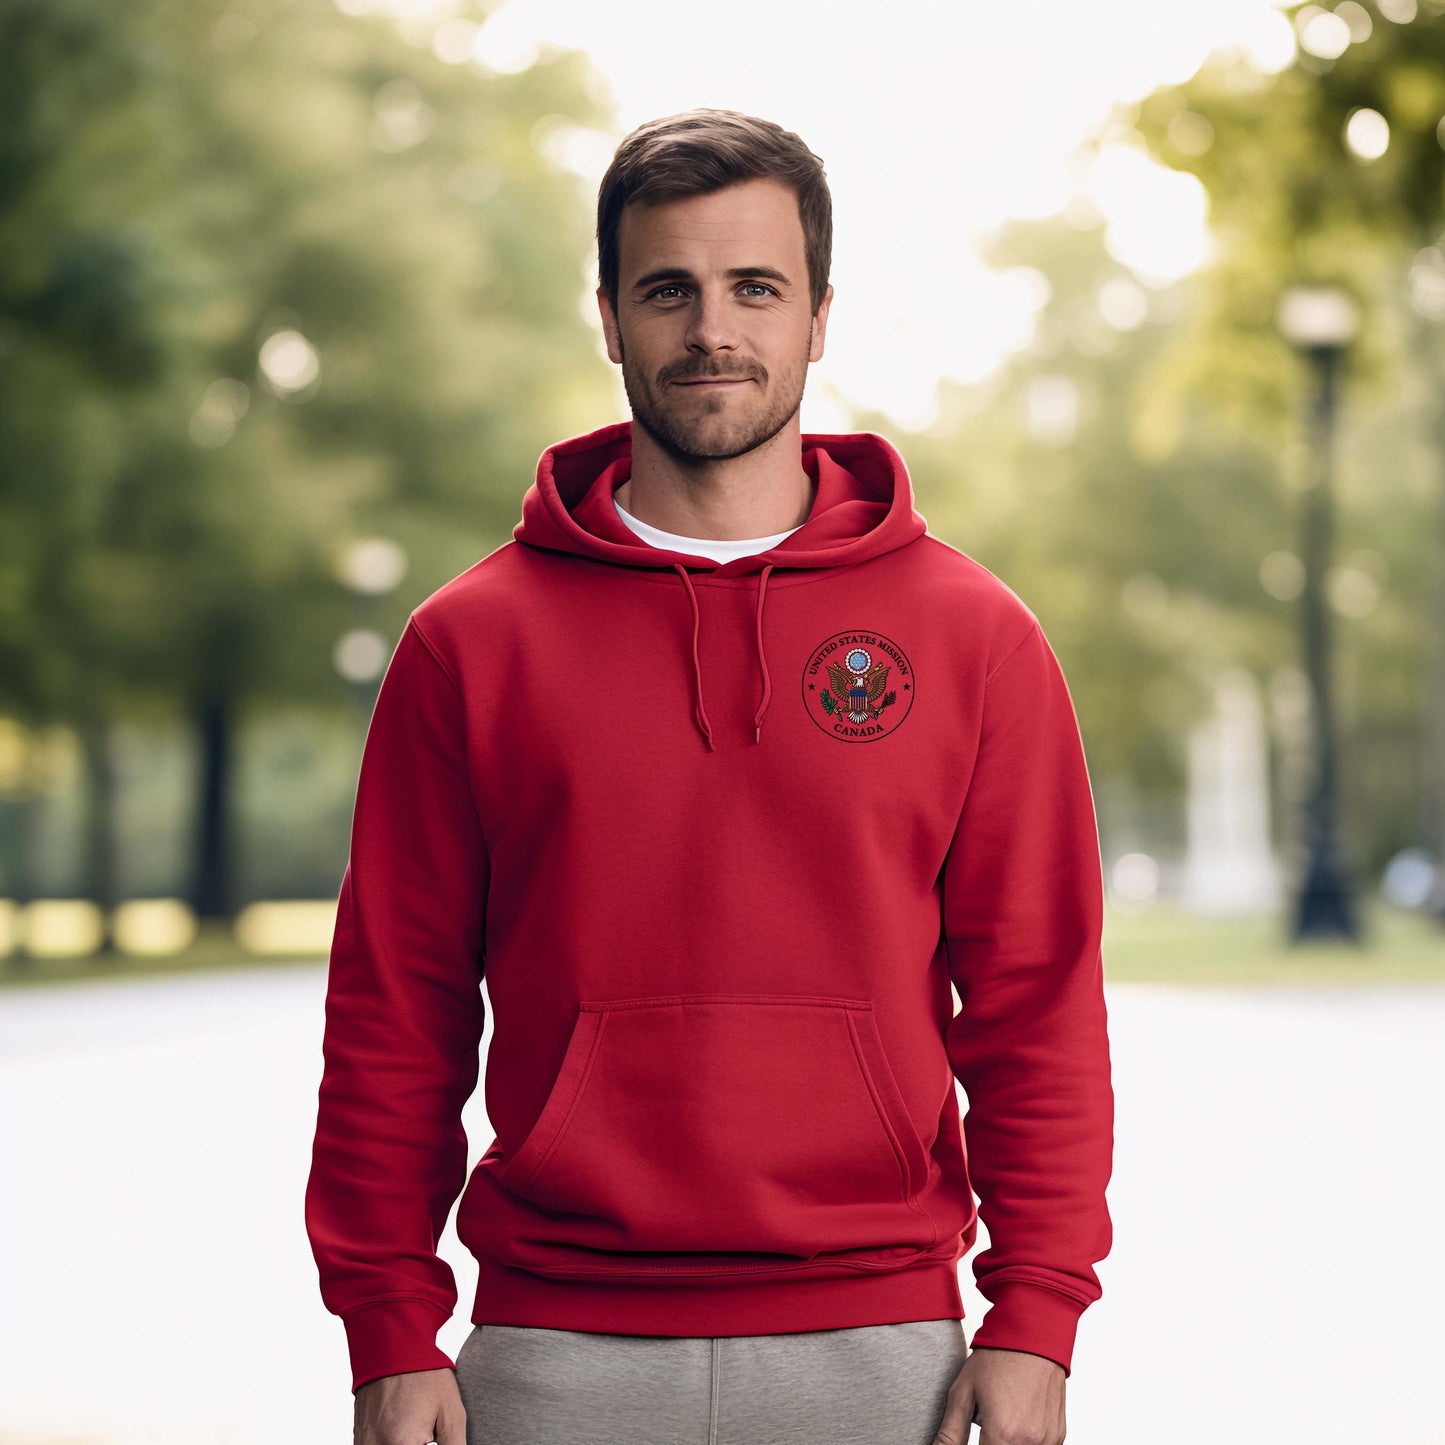 Embroidered Hoodie, Color Seal: Canada